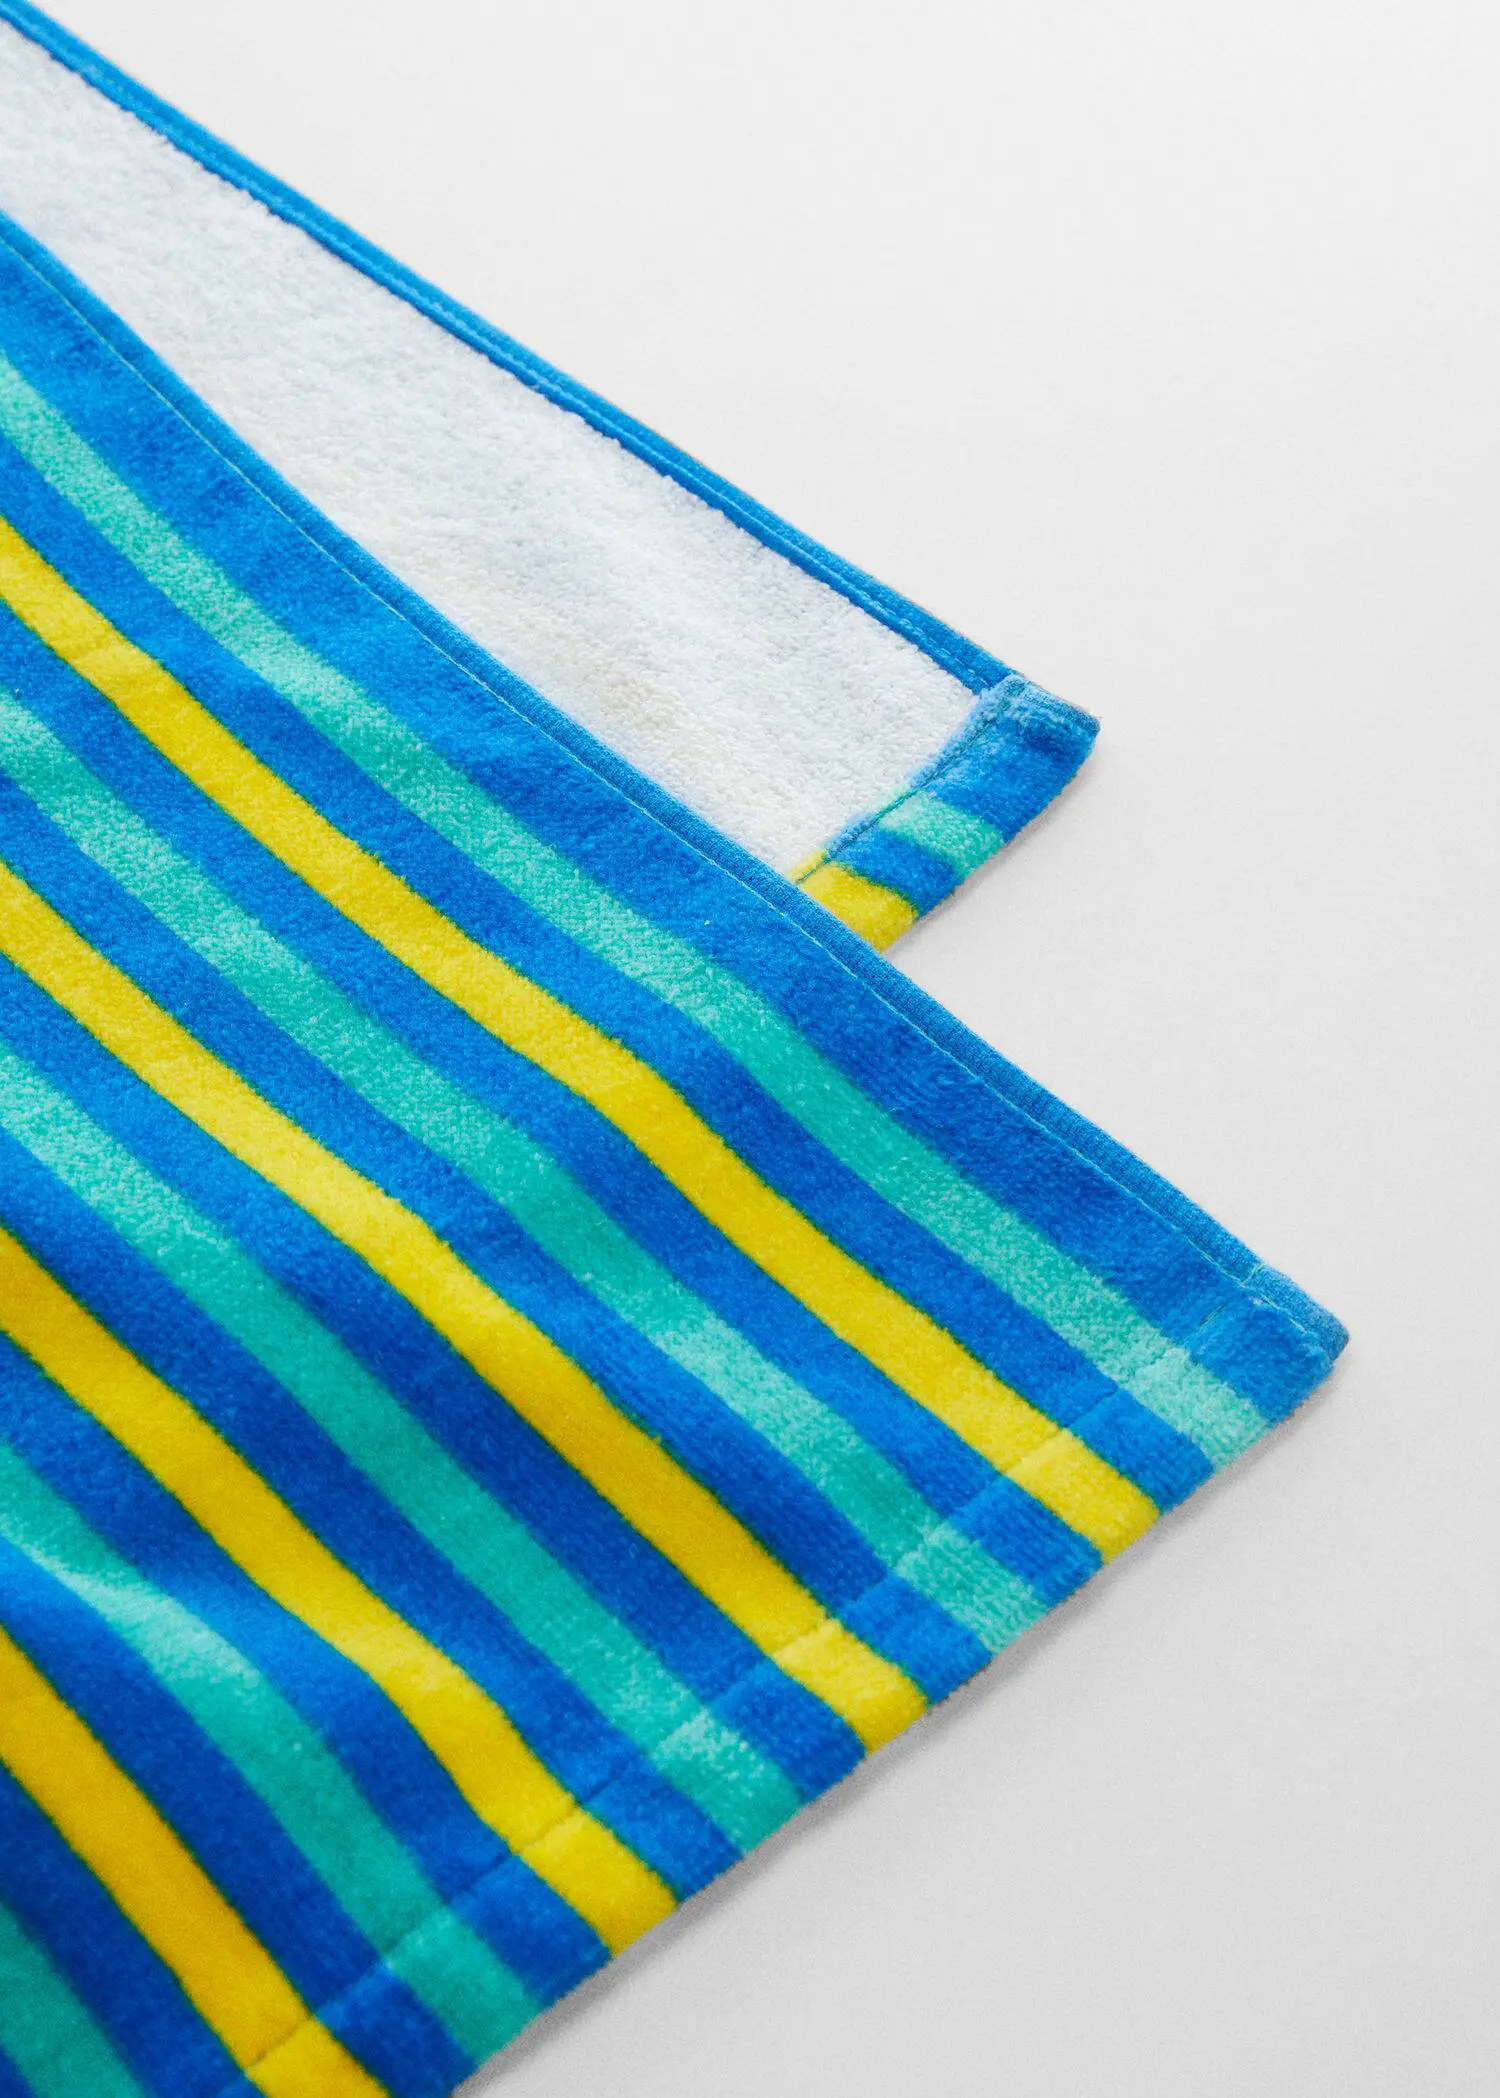 Mango Multi-coloured striped beach towel. a close-up view of a blue, yellow, and green striped towel. 